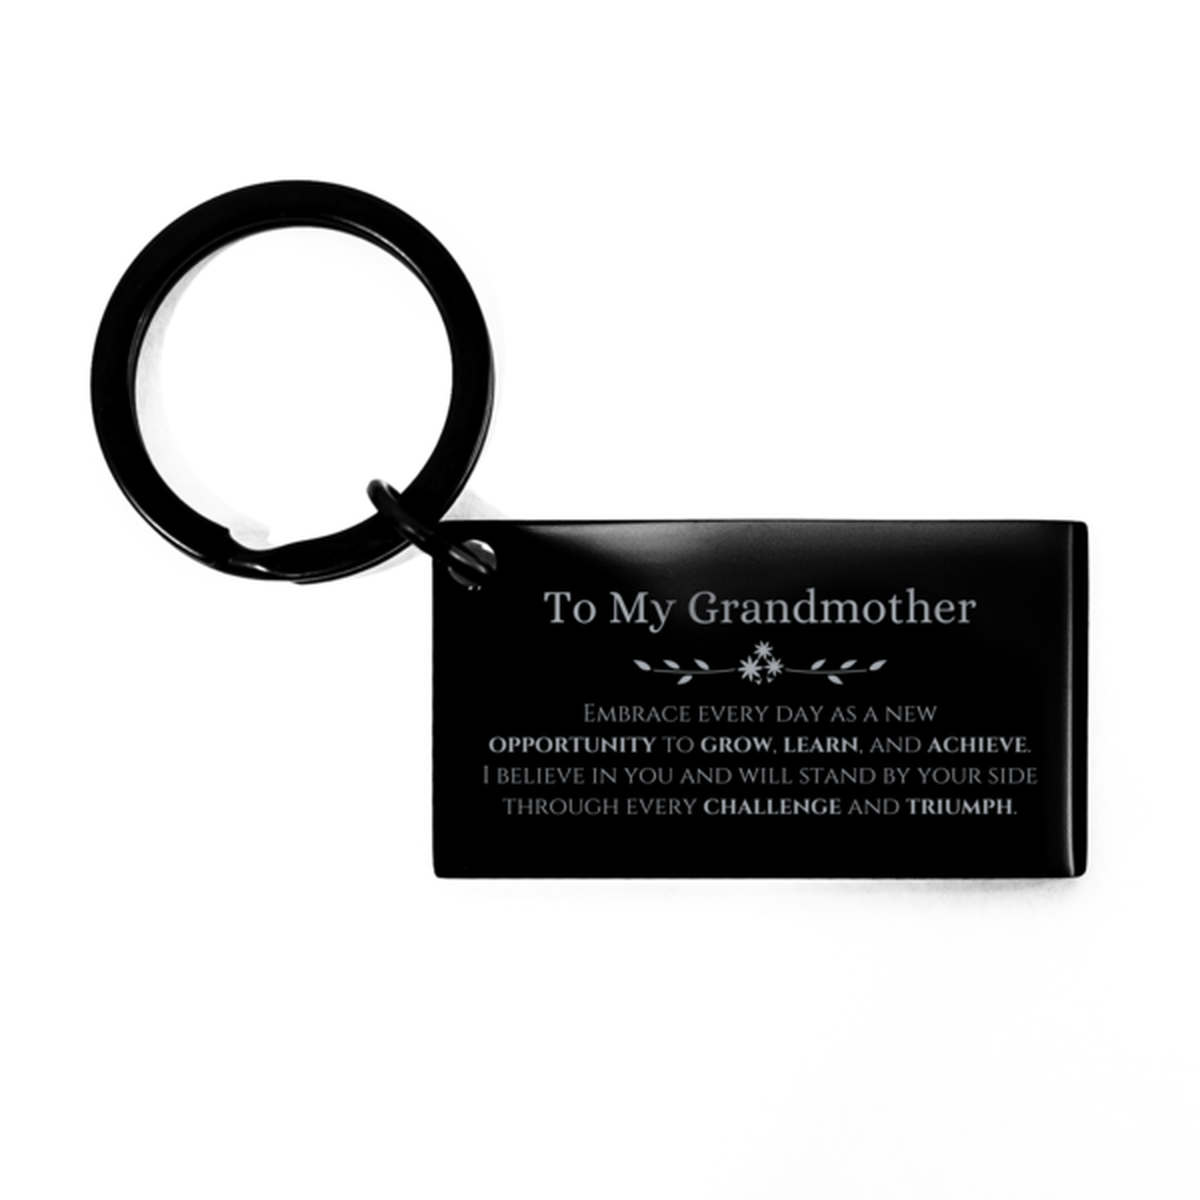 To My Grandmother Gifts, I believe in you and will stand by your side, Inspirational Keychain For Grandmother, Birthday Christmas Motivational Grandmother Gifts